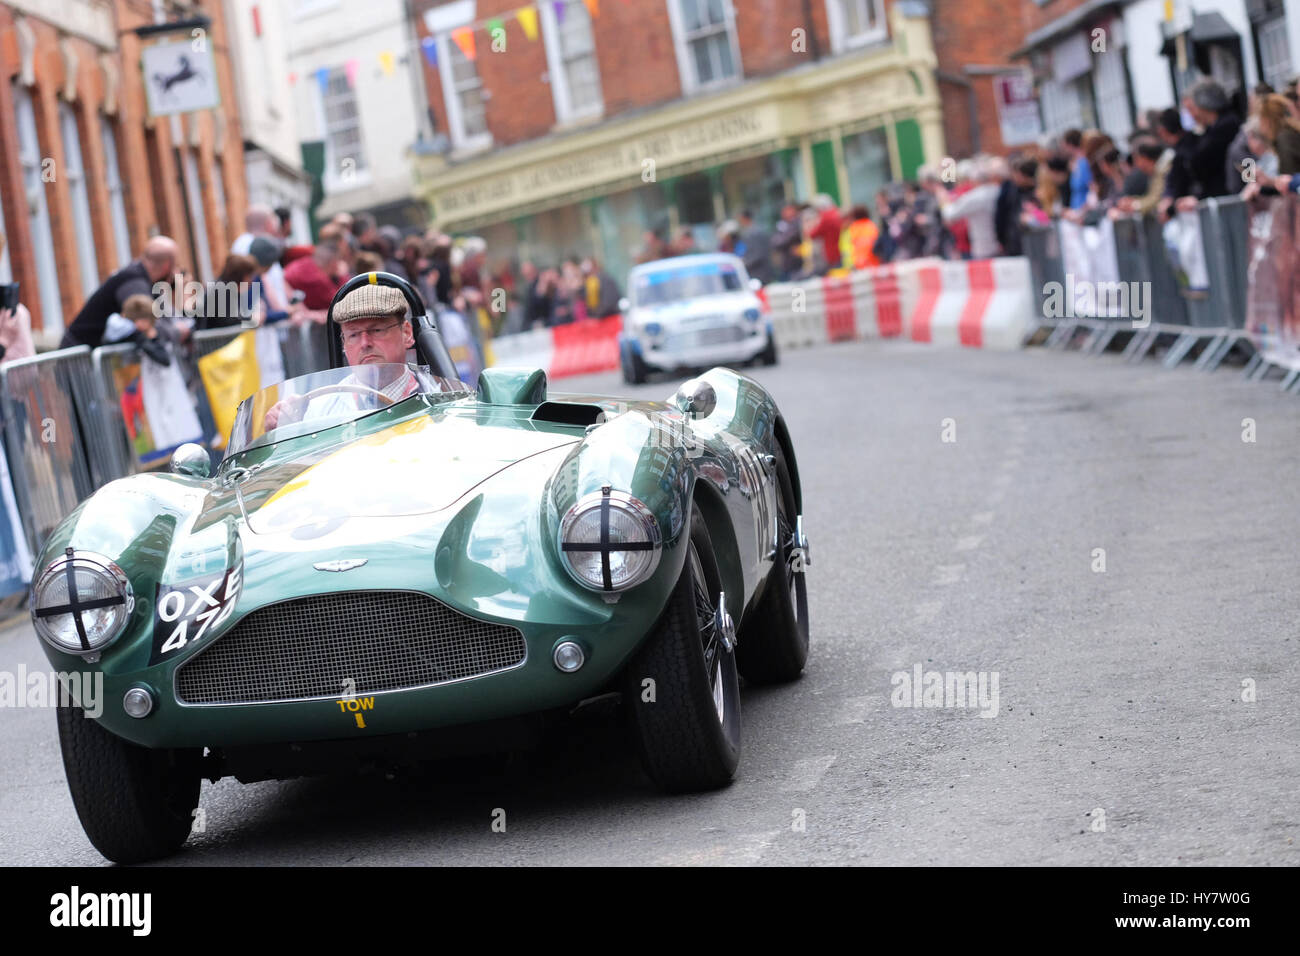 Bromyard Speed Festival, Herefordshire, UK - Sunday 2nd April 2017 - Vintage and classic cars roar through the town centre of Bromyard as fans watch the 2nd Bromyard Speed Festival. The photo shows a vintage Aston Martin DB3S car. Photo Steven May / Alamy Live News Stock Photo